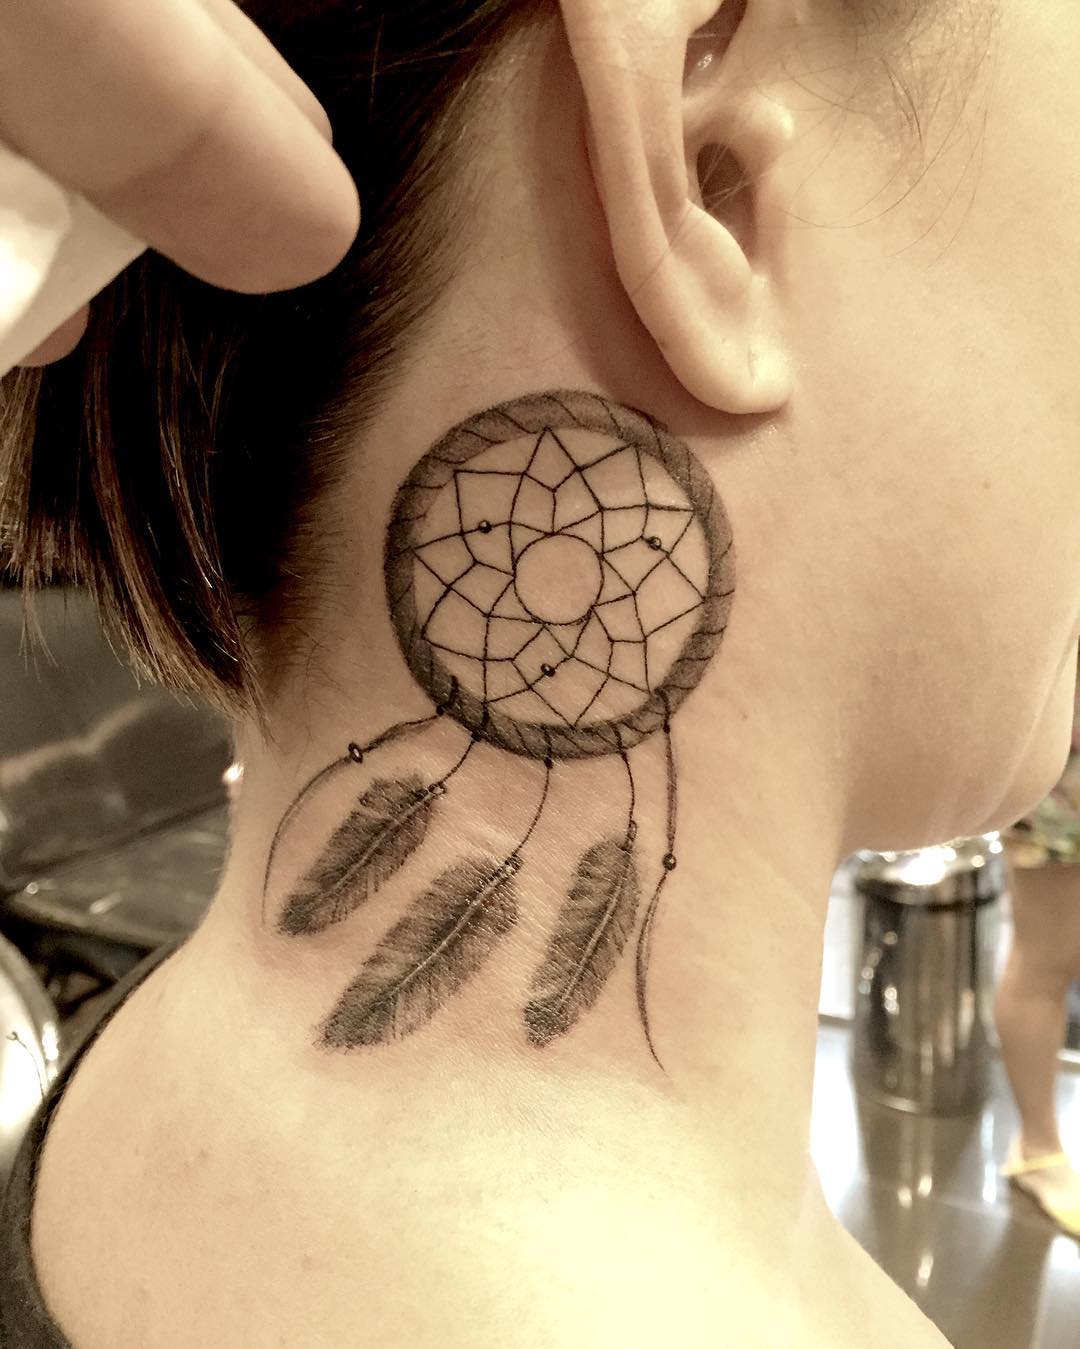 A dream catcher tattoo behind the ear is a popular tattoo these days. It's usually done in black ink, and it can be done in a variety of styles depending on the artist. The dream catcher itself is usually small, with intricate patterns and designs surrounding it, so let's go and get it!